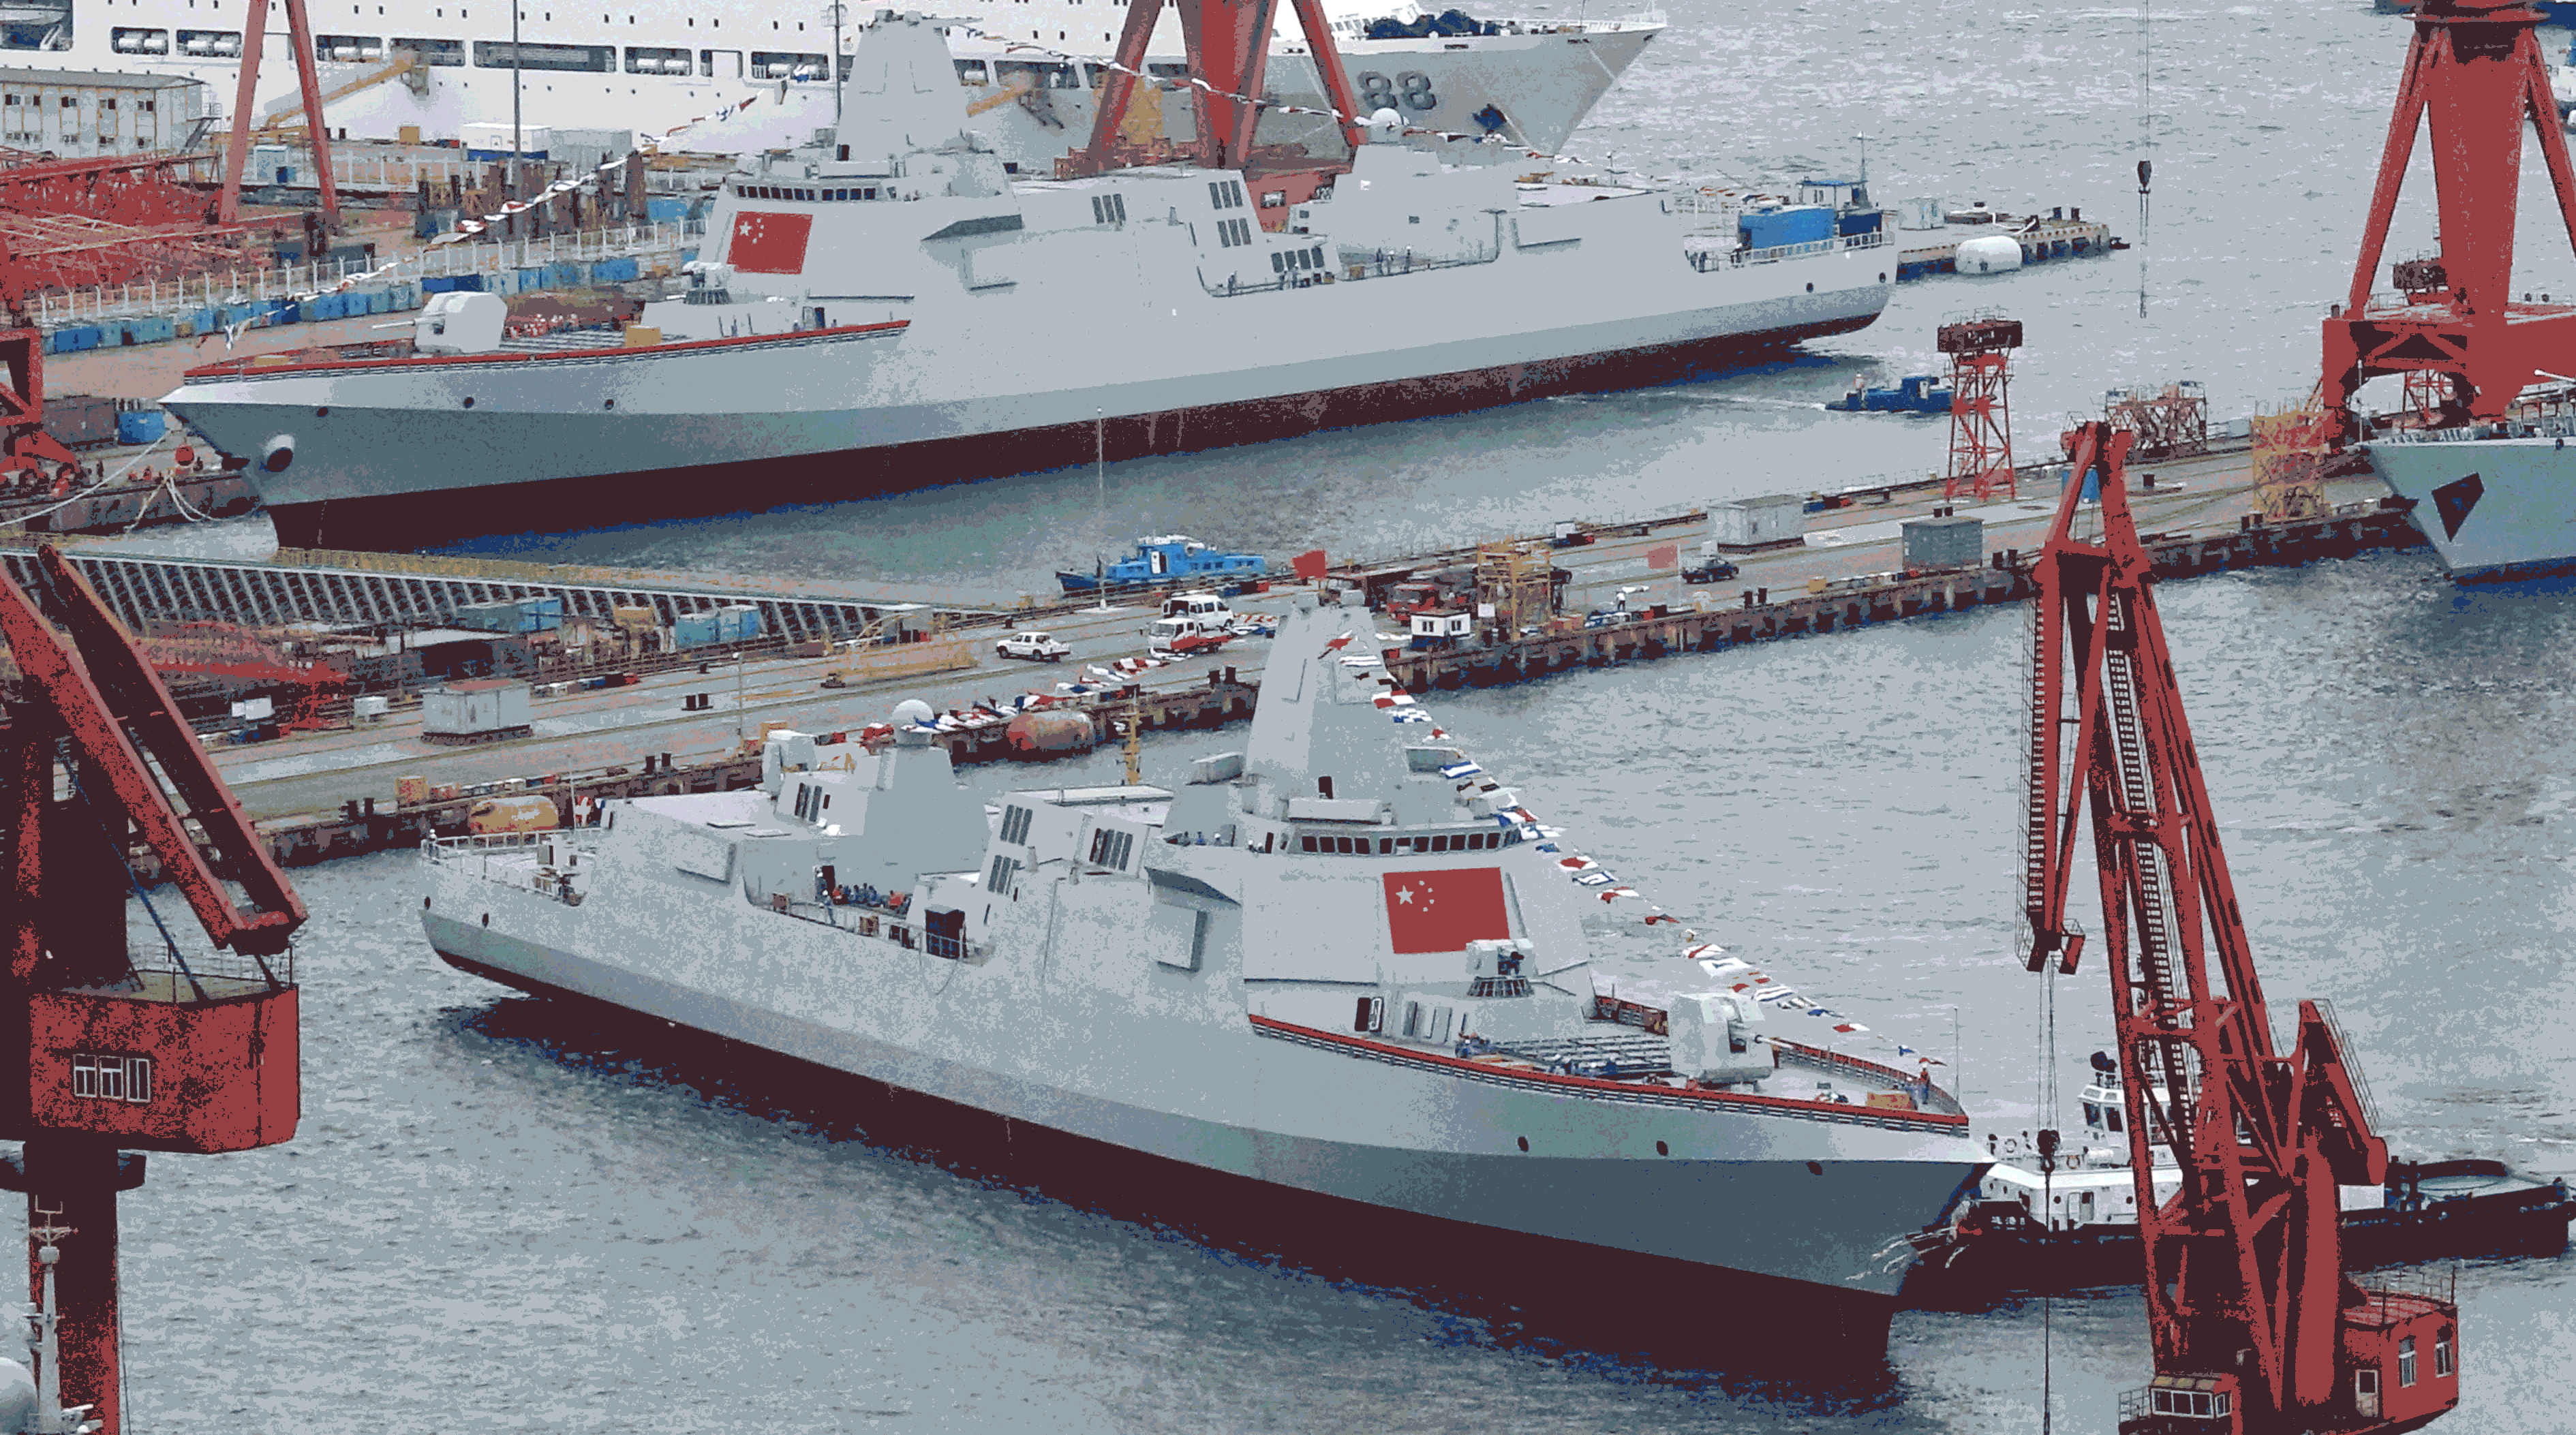 China S Elite Type 055 Destroyers Not Its Aircraft Carriers Images, Photos, Reviews